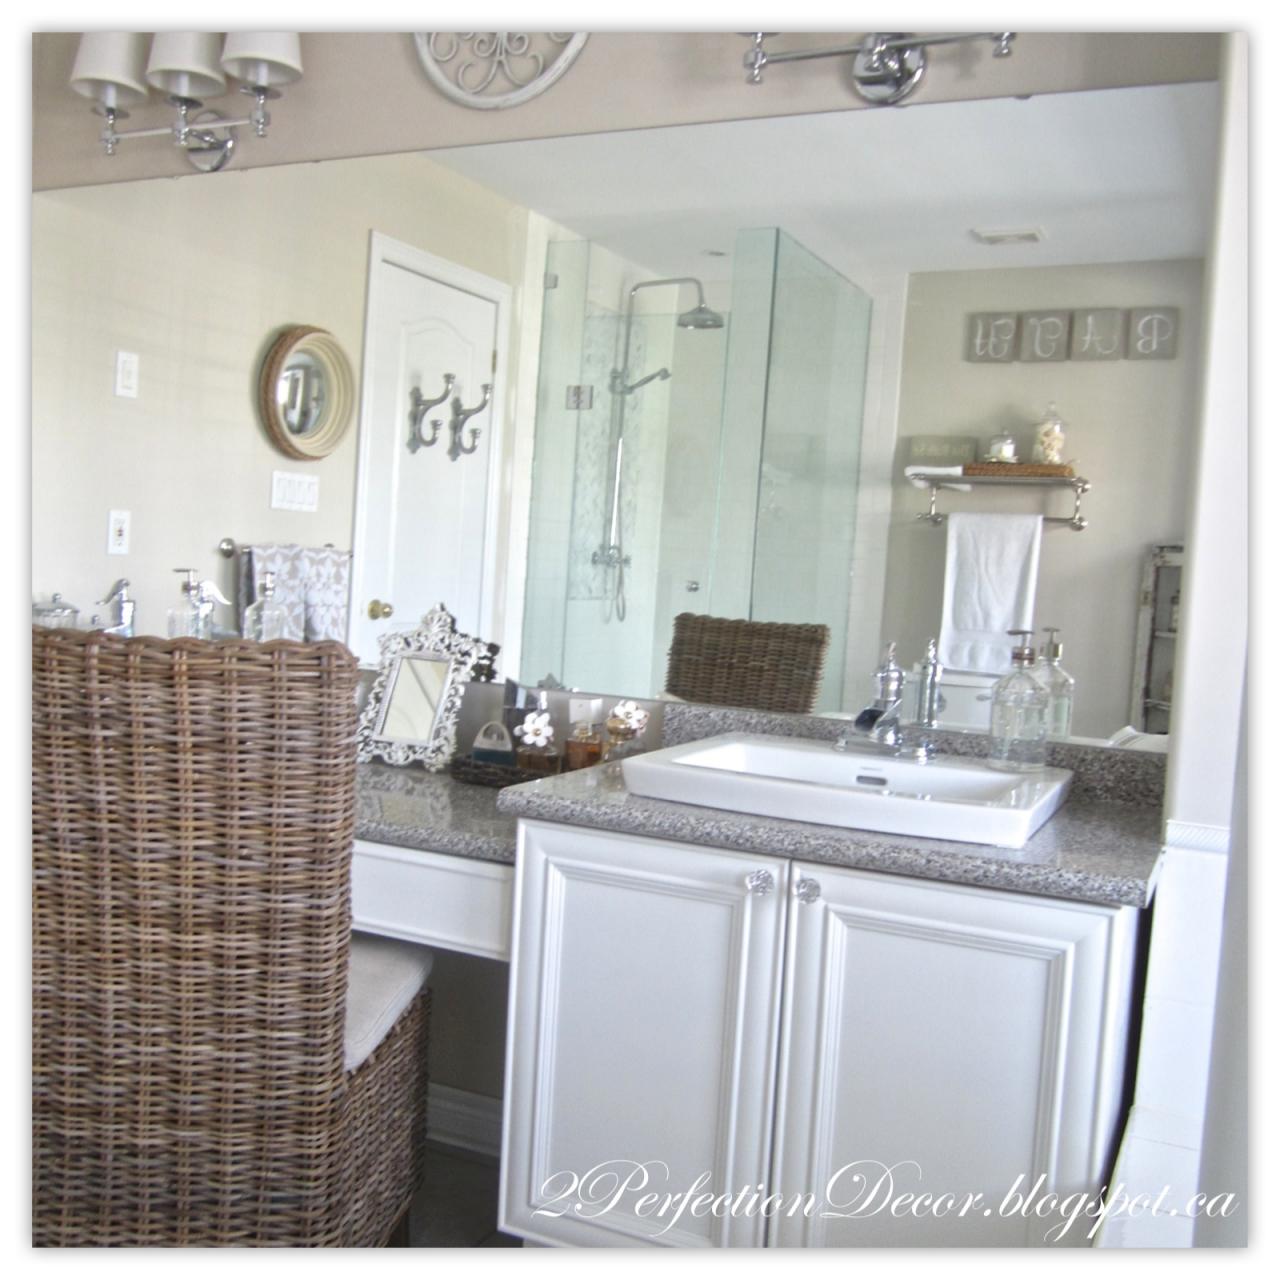 2Perfection Decor Updating old Bathroom Sinks.. while reusing old